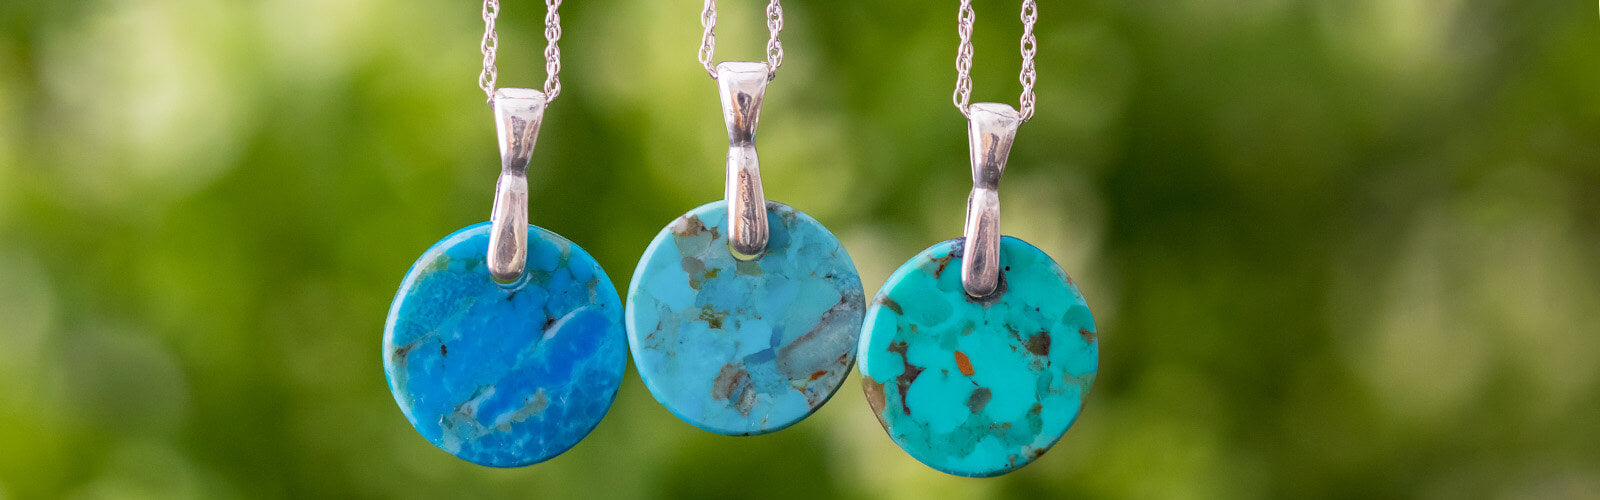 Authentic Turquoise Necklaces